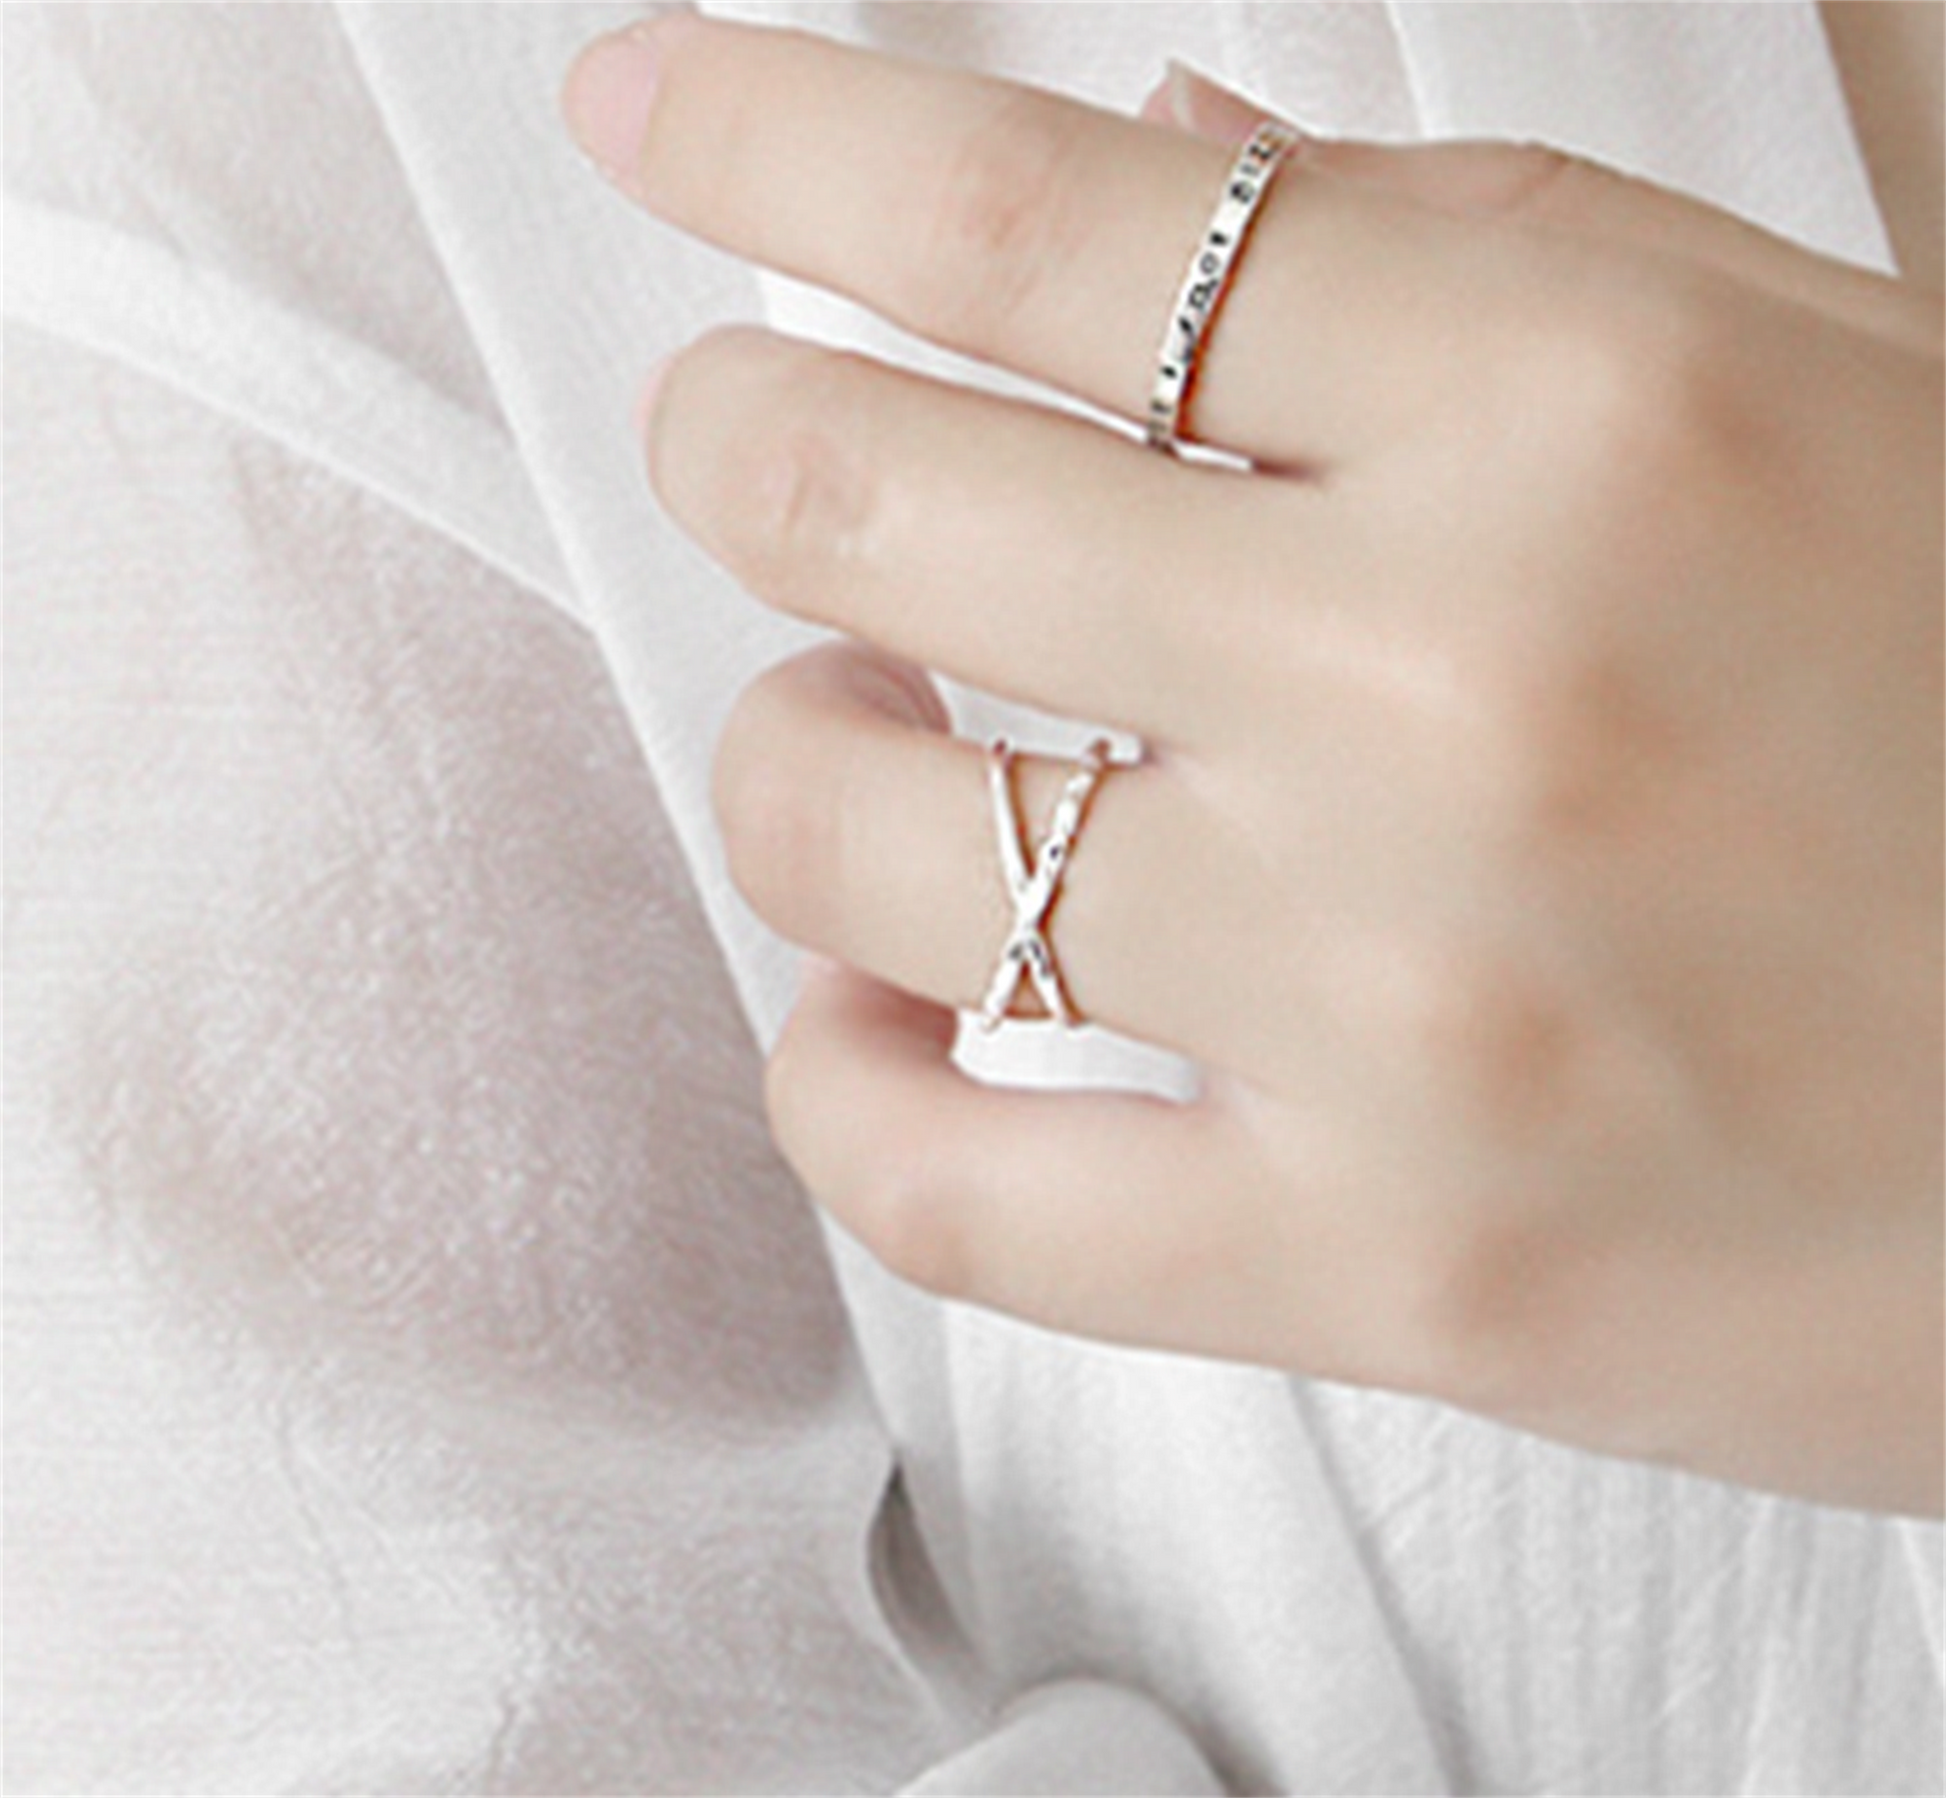 Adjustable Sterling Silver Hammered Cross Ring with Polished Finish - sugarkittenlondon